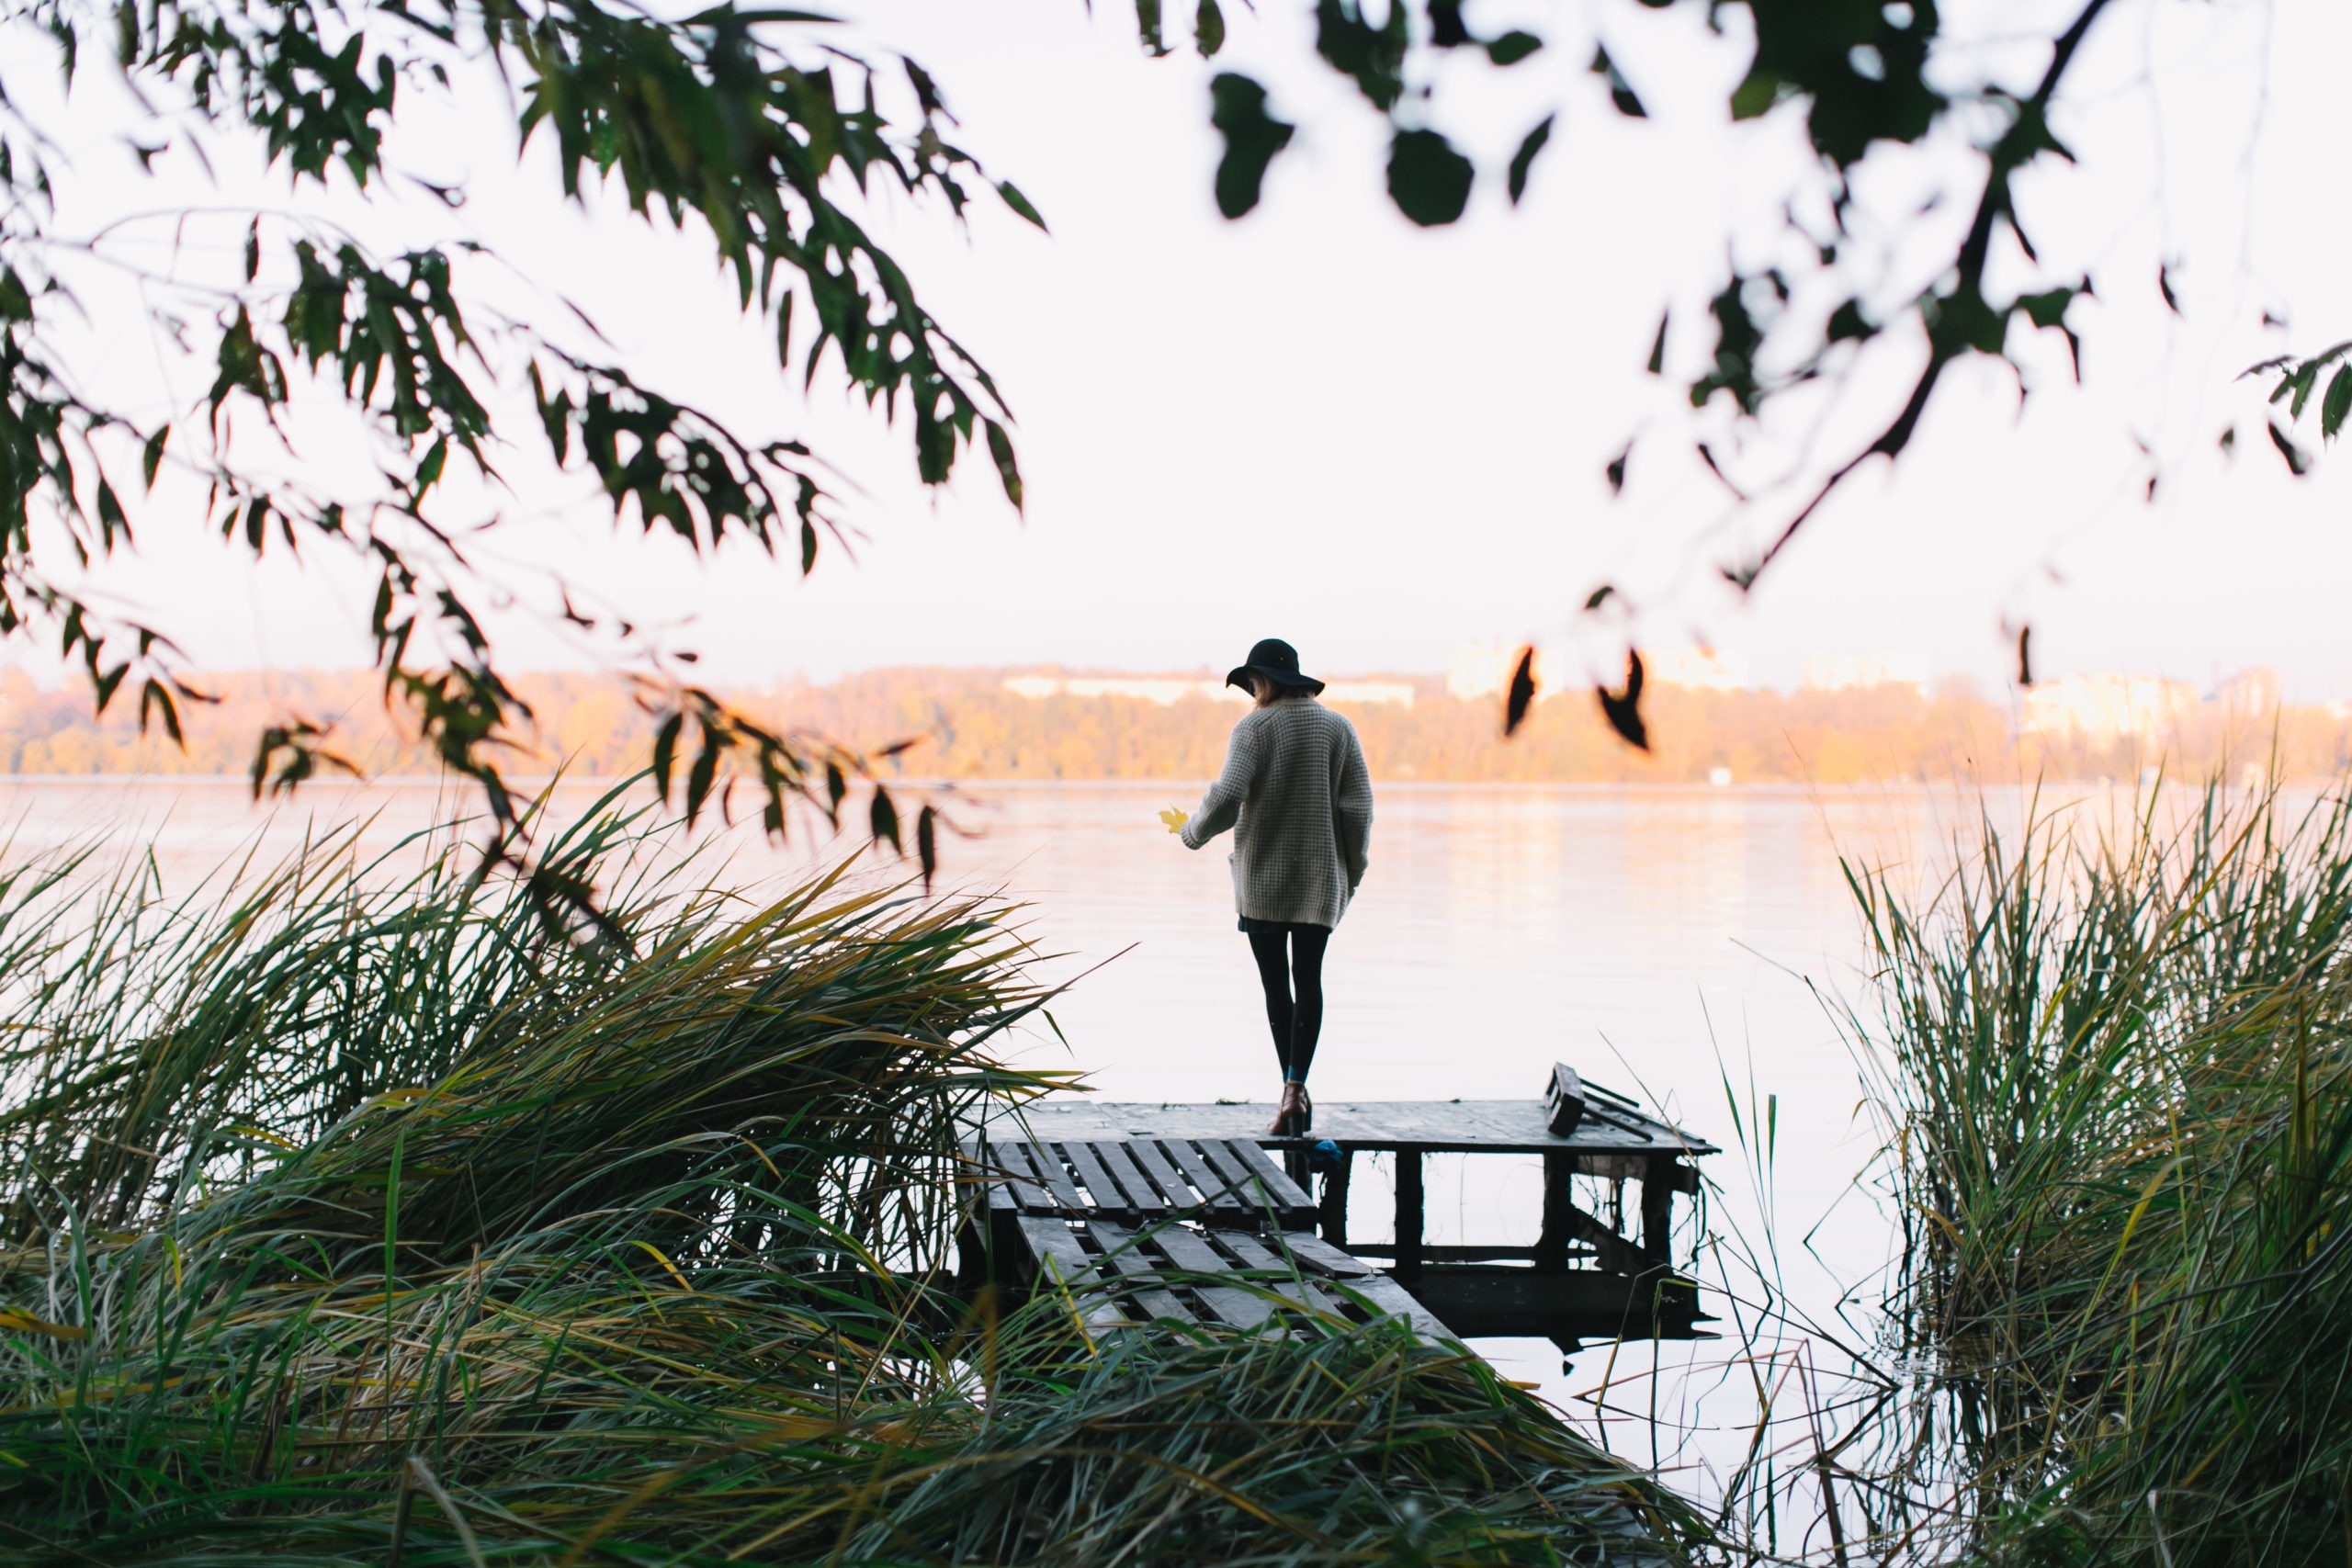 Melancholic woman standing by the lake on a wooden dock, tall grasses in the background.